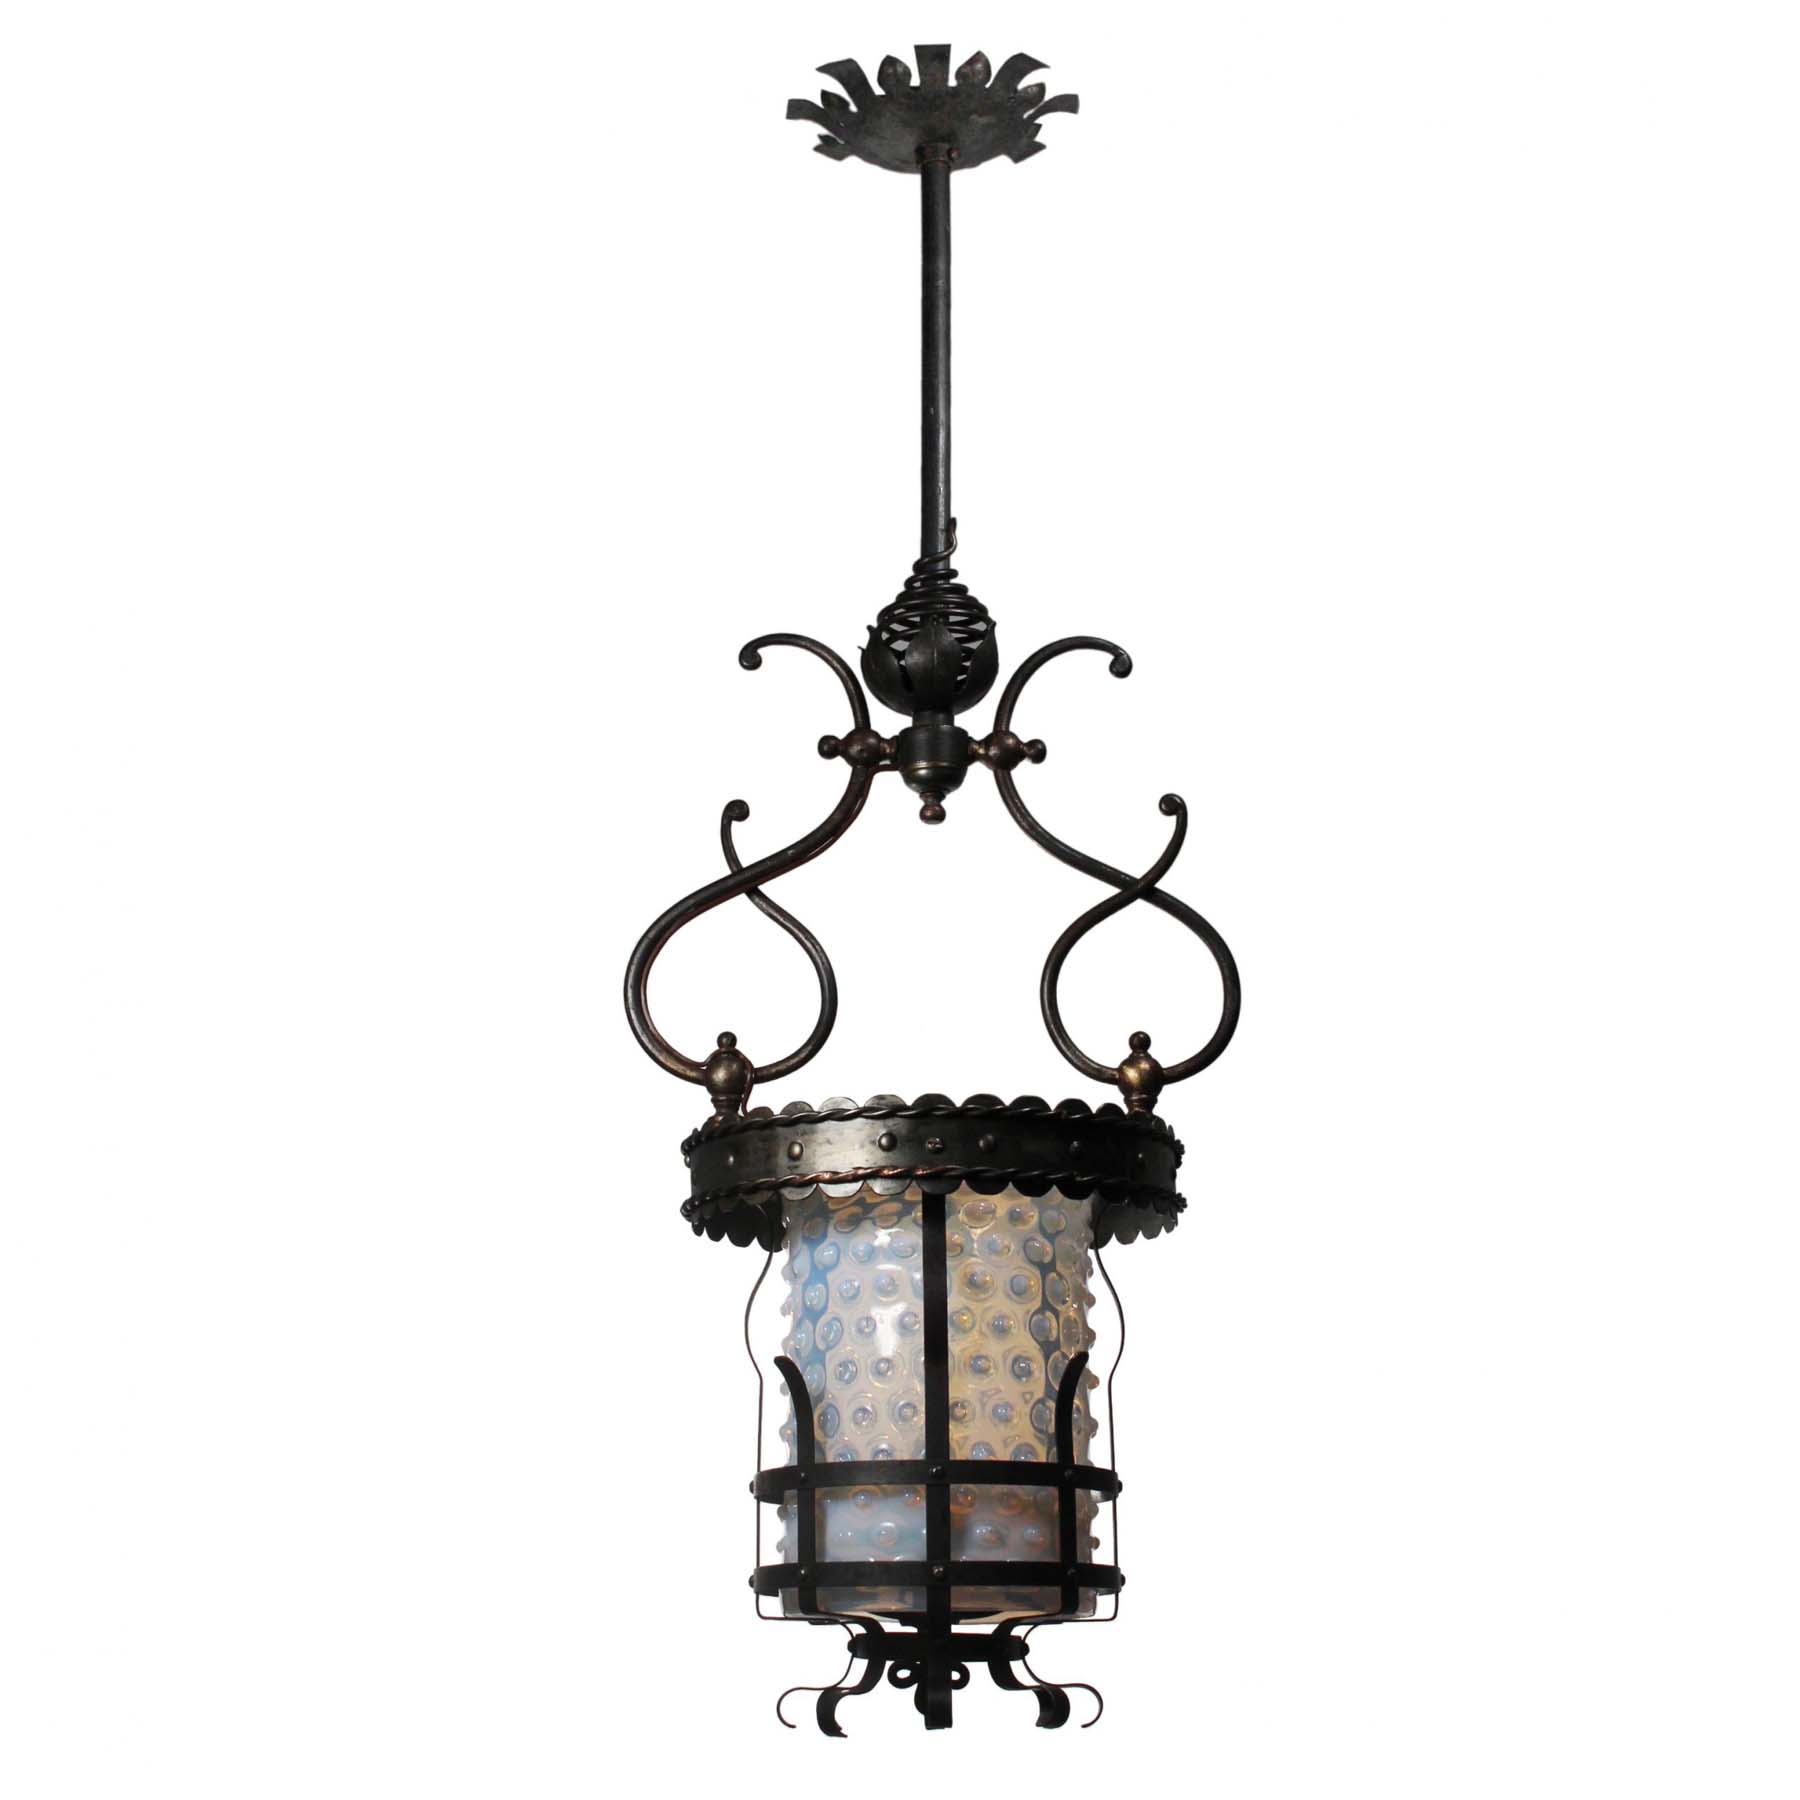 SOLD Antique Gas Lantern with Hobnail Shade, c. 1880’s-69500